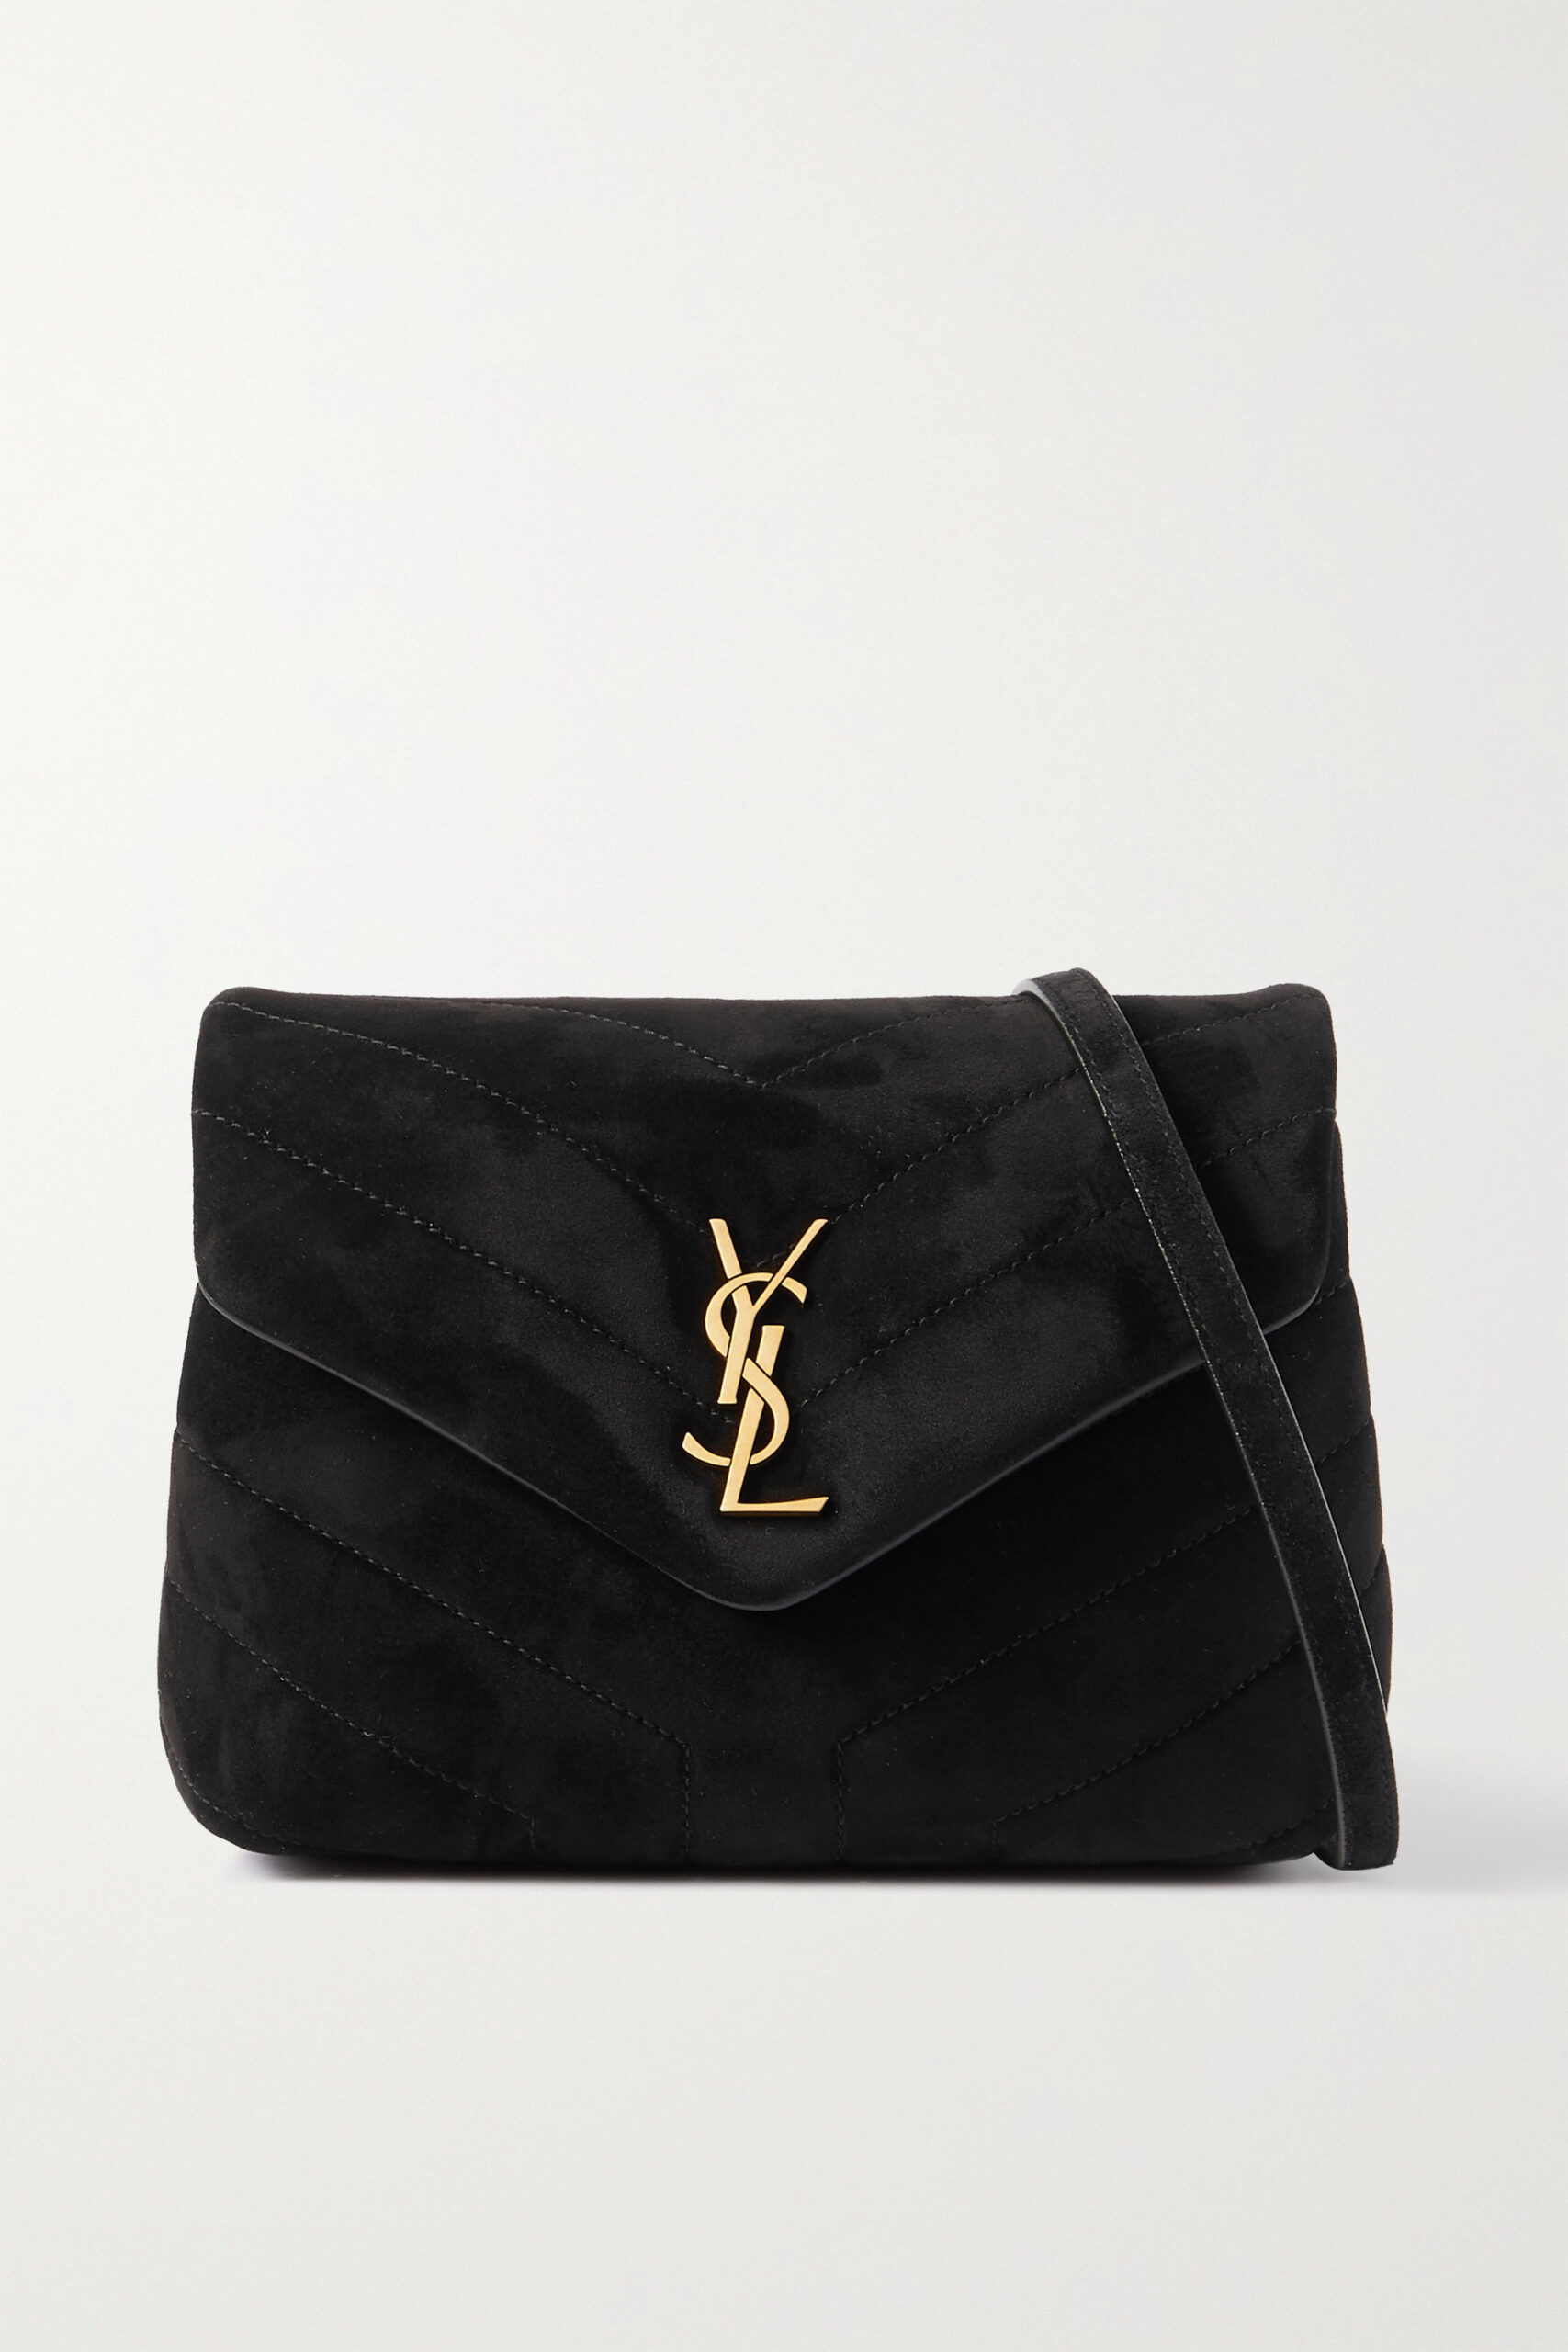 Loulou Toy quilted-leather cross-body bag, Saint Laurent